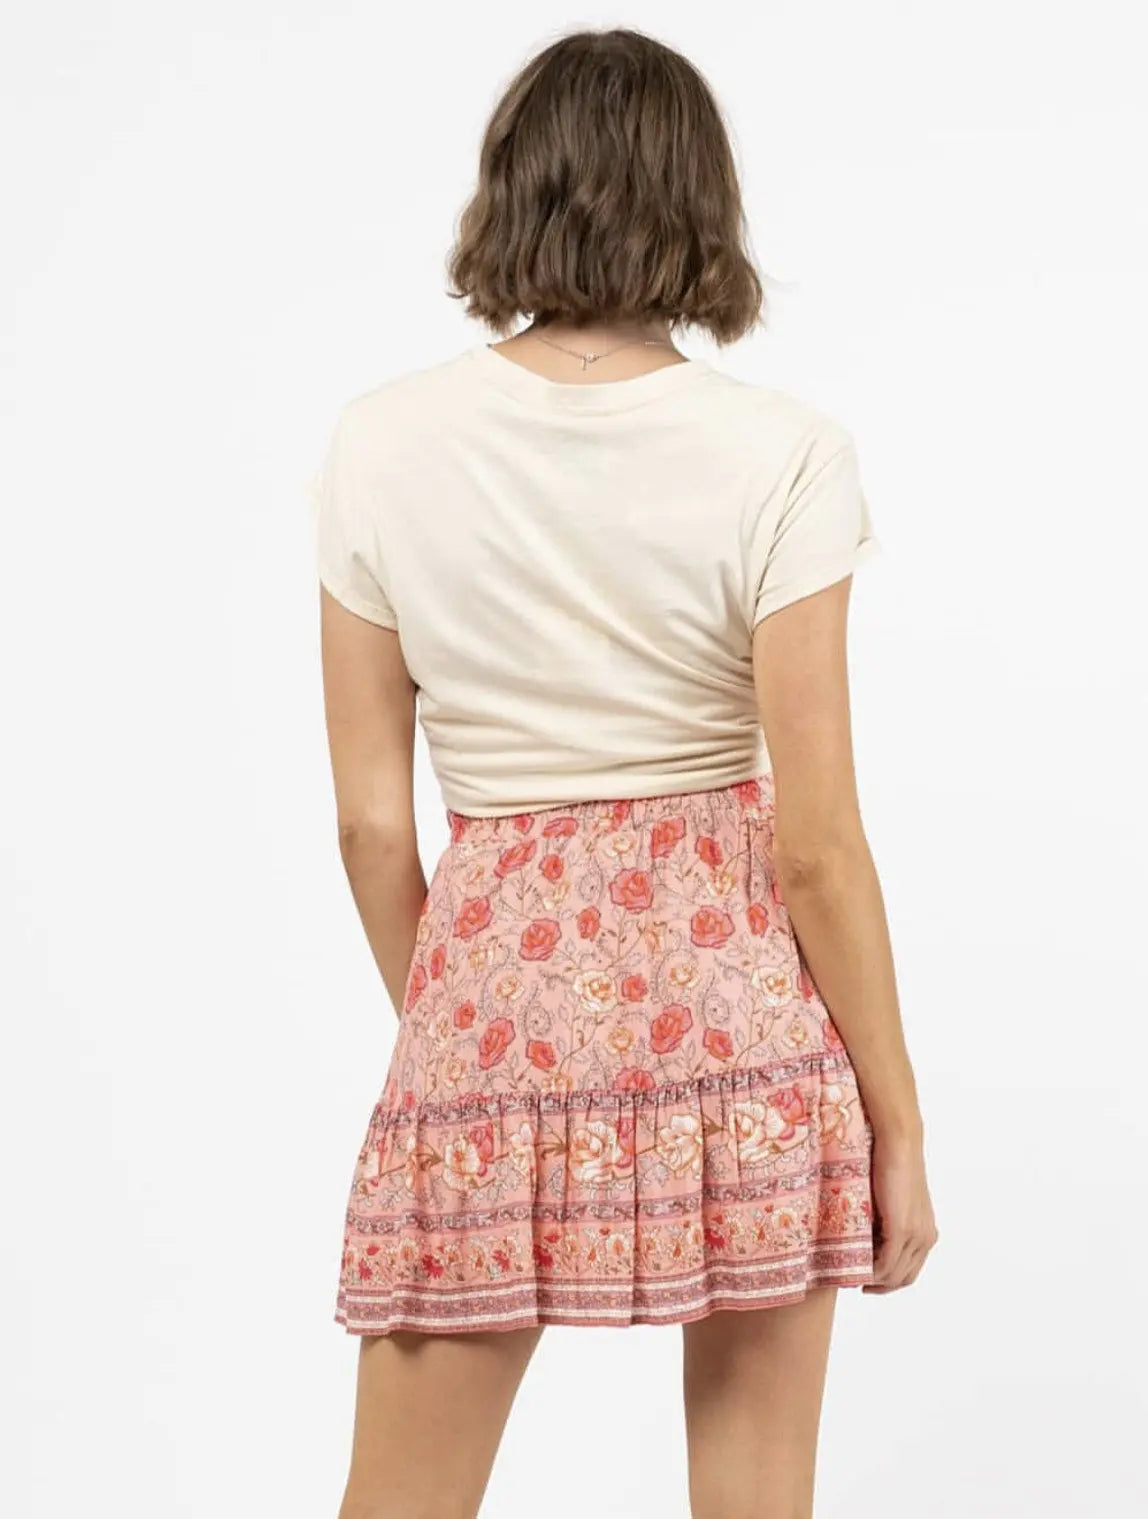 MALAWI SKIRT | FLORAL PAPER HEART